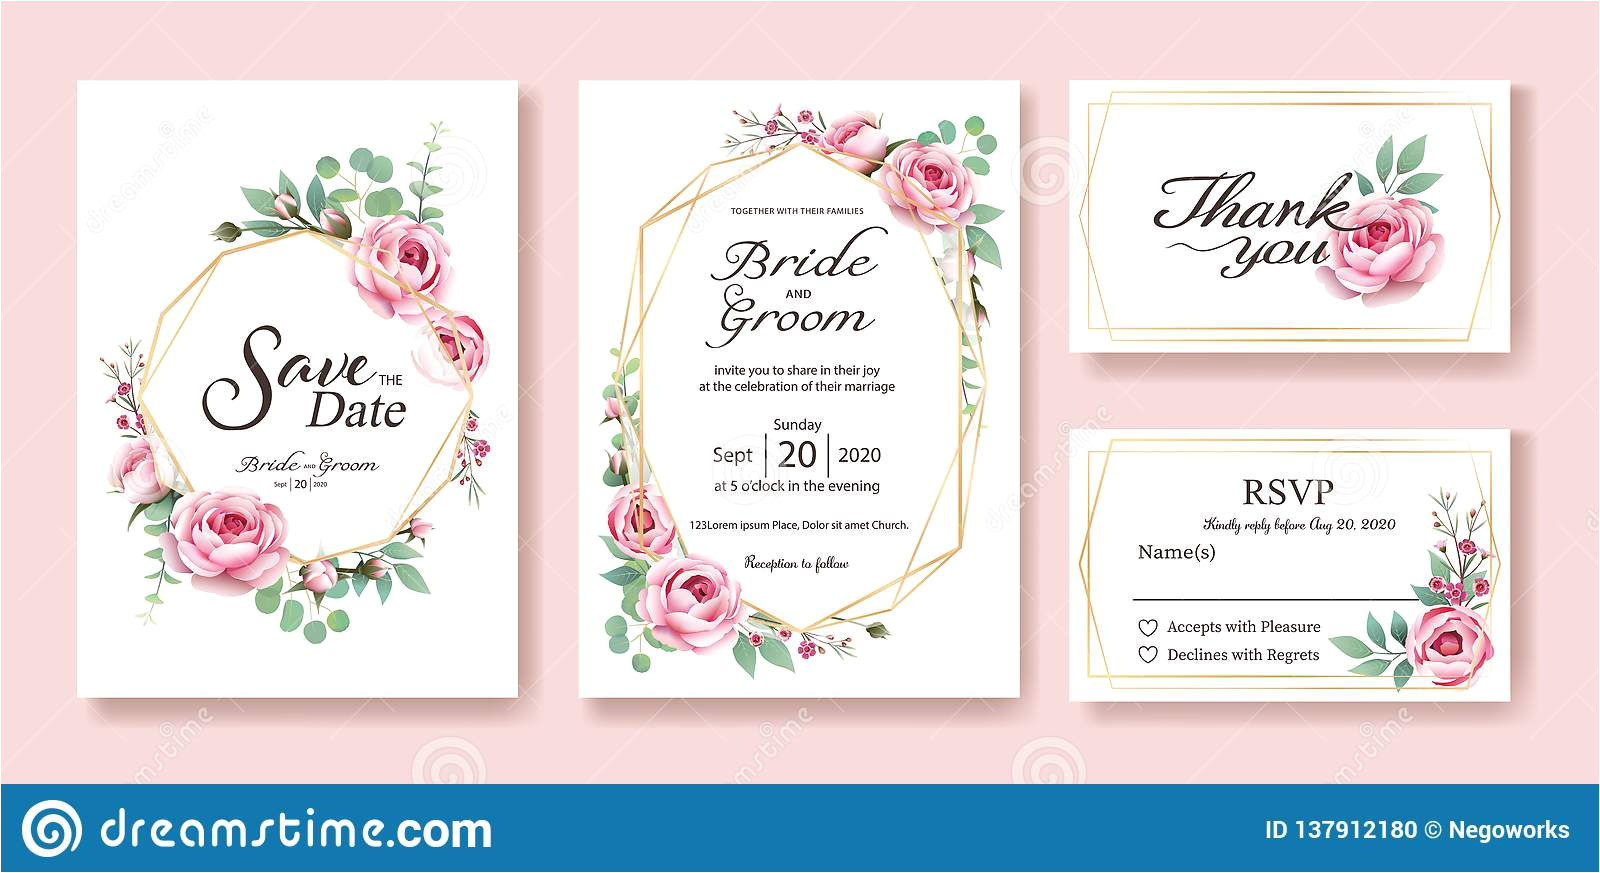 floral wedding invitation save date thank you rsvp card design template vector queen sweden rose silver dollar leaves wax image137912180